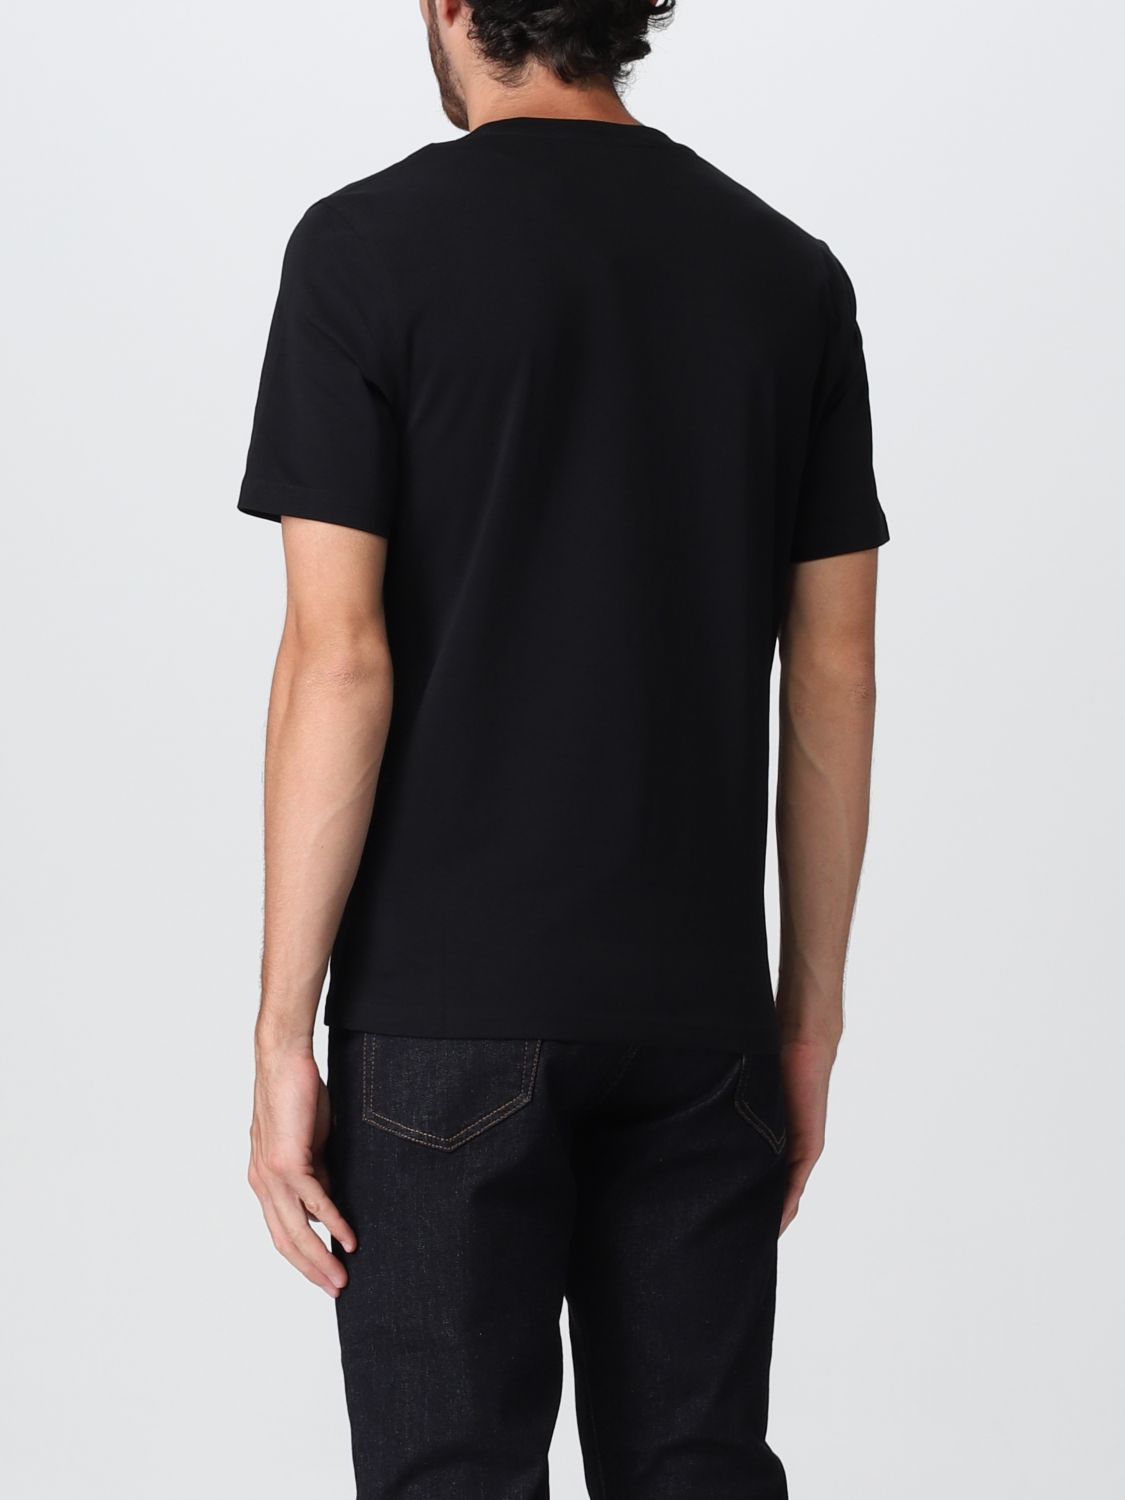 T-shirt Moschino Couture: Moschino Couture t-shirt for men black 2